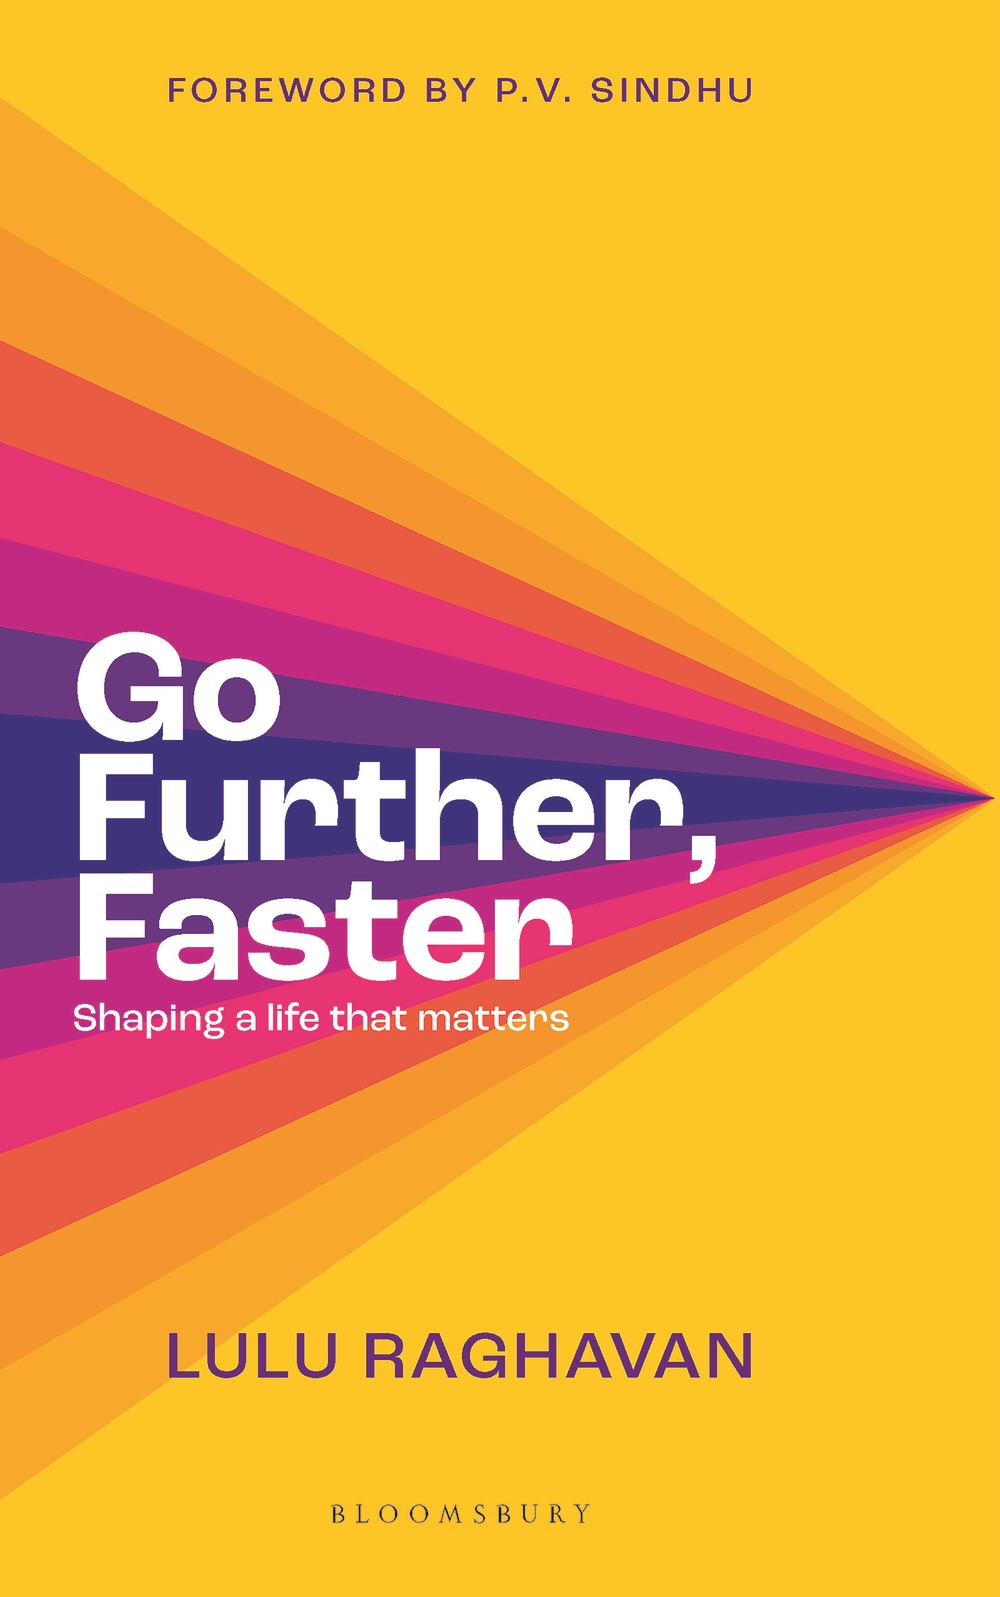 Go Further, Faster book jacket